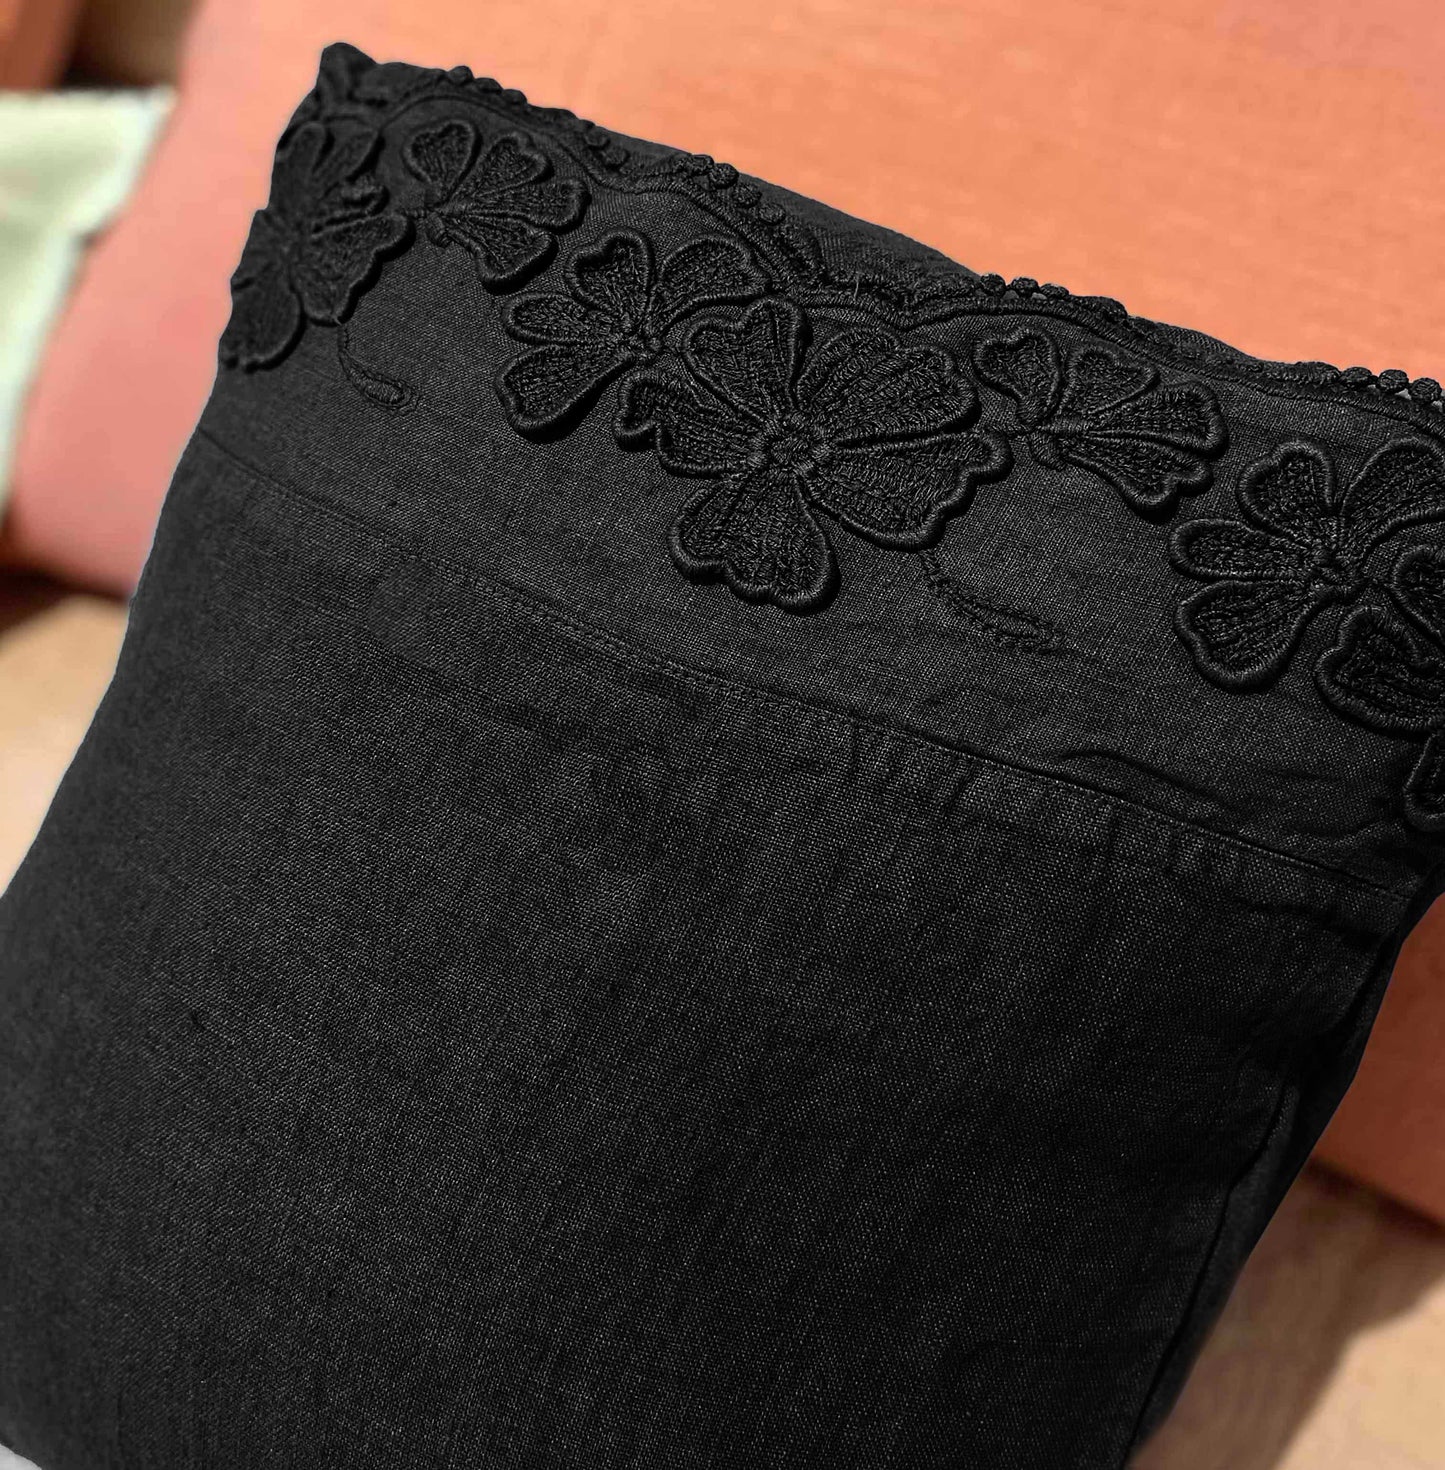 Pillowcase with Petals embroidery * while stocks last